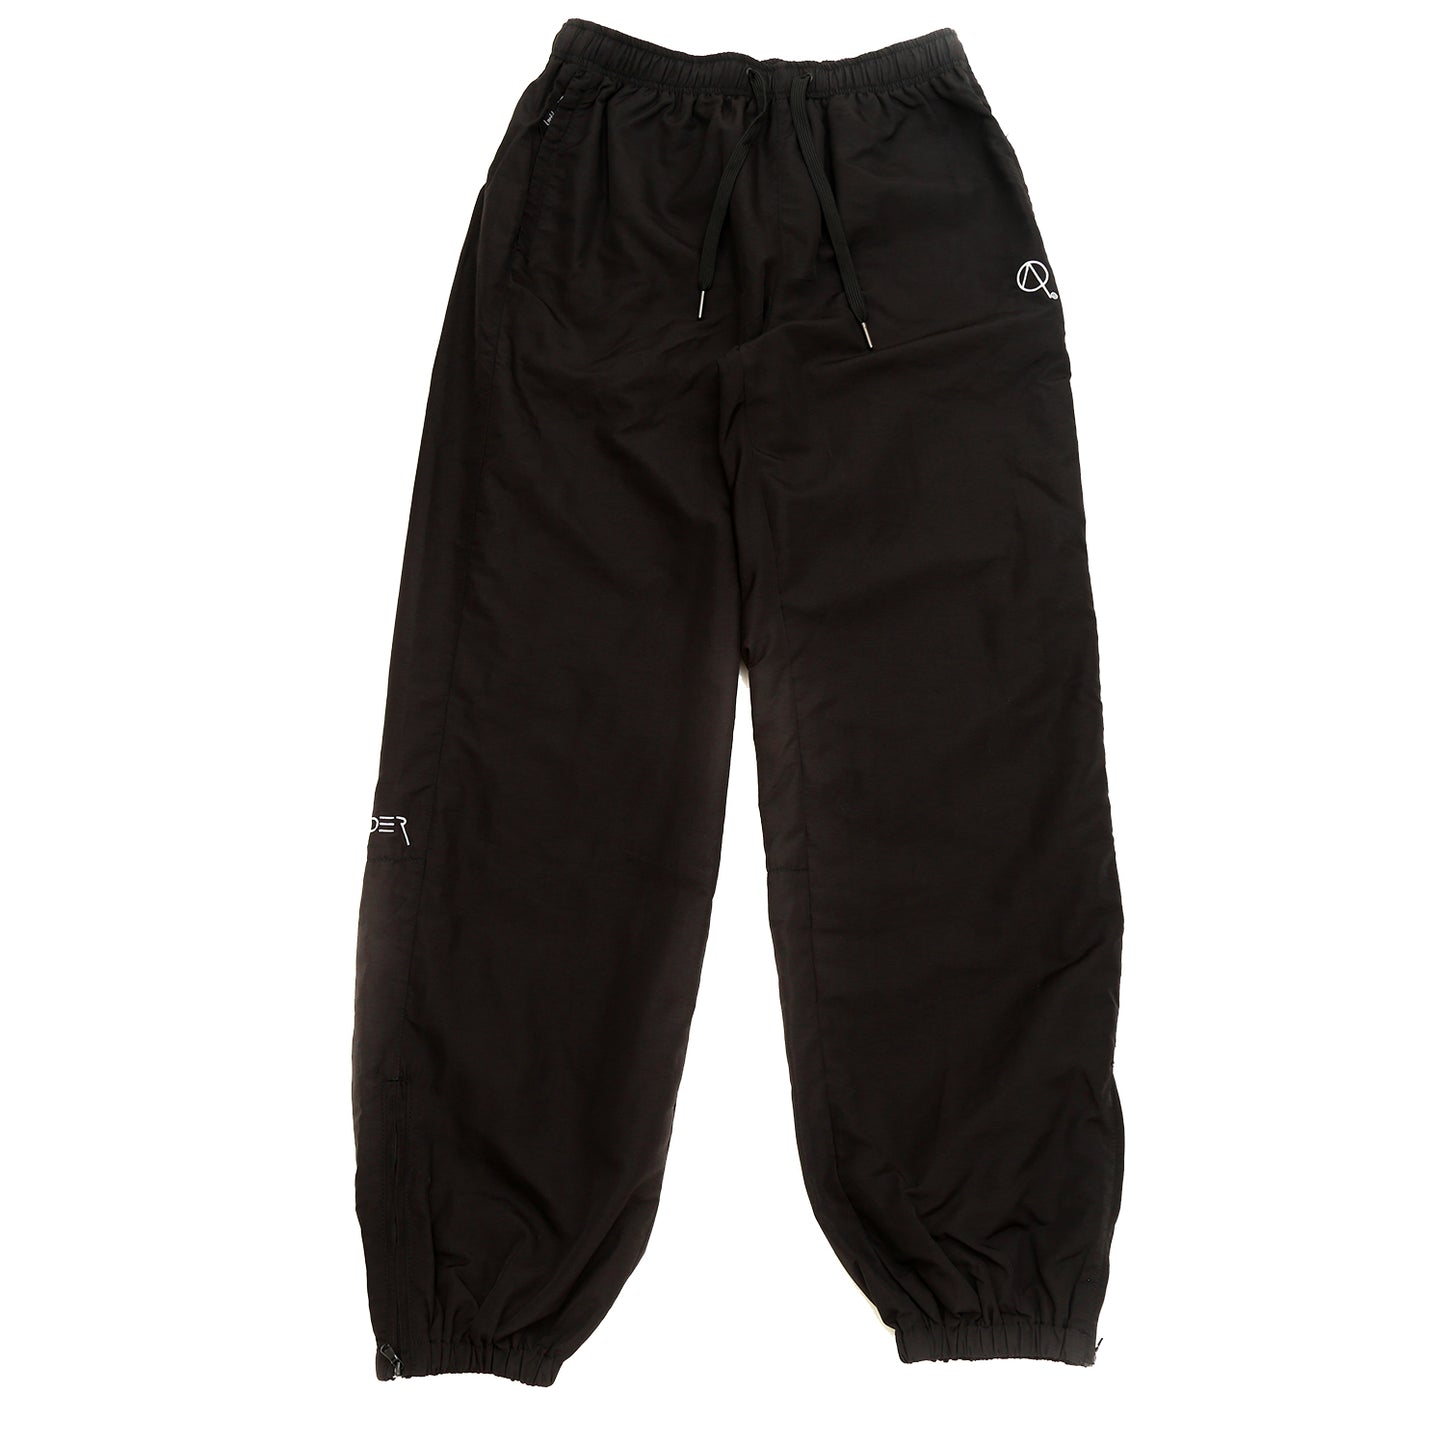 BASECAMP RUNNING WOVEN TRACK PANT IN BLACK AND WHITE